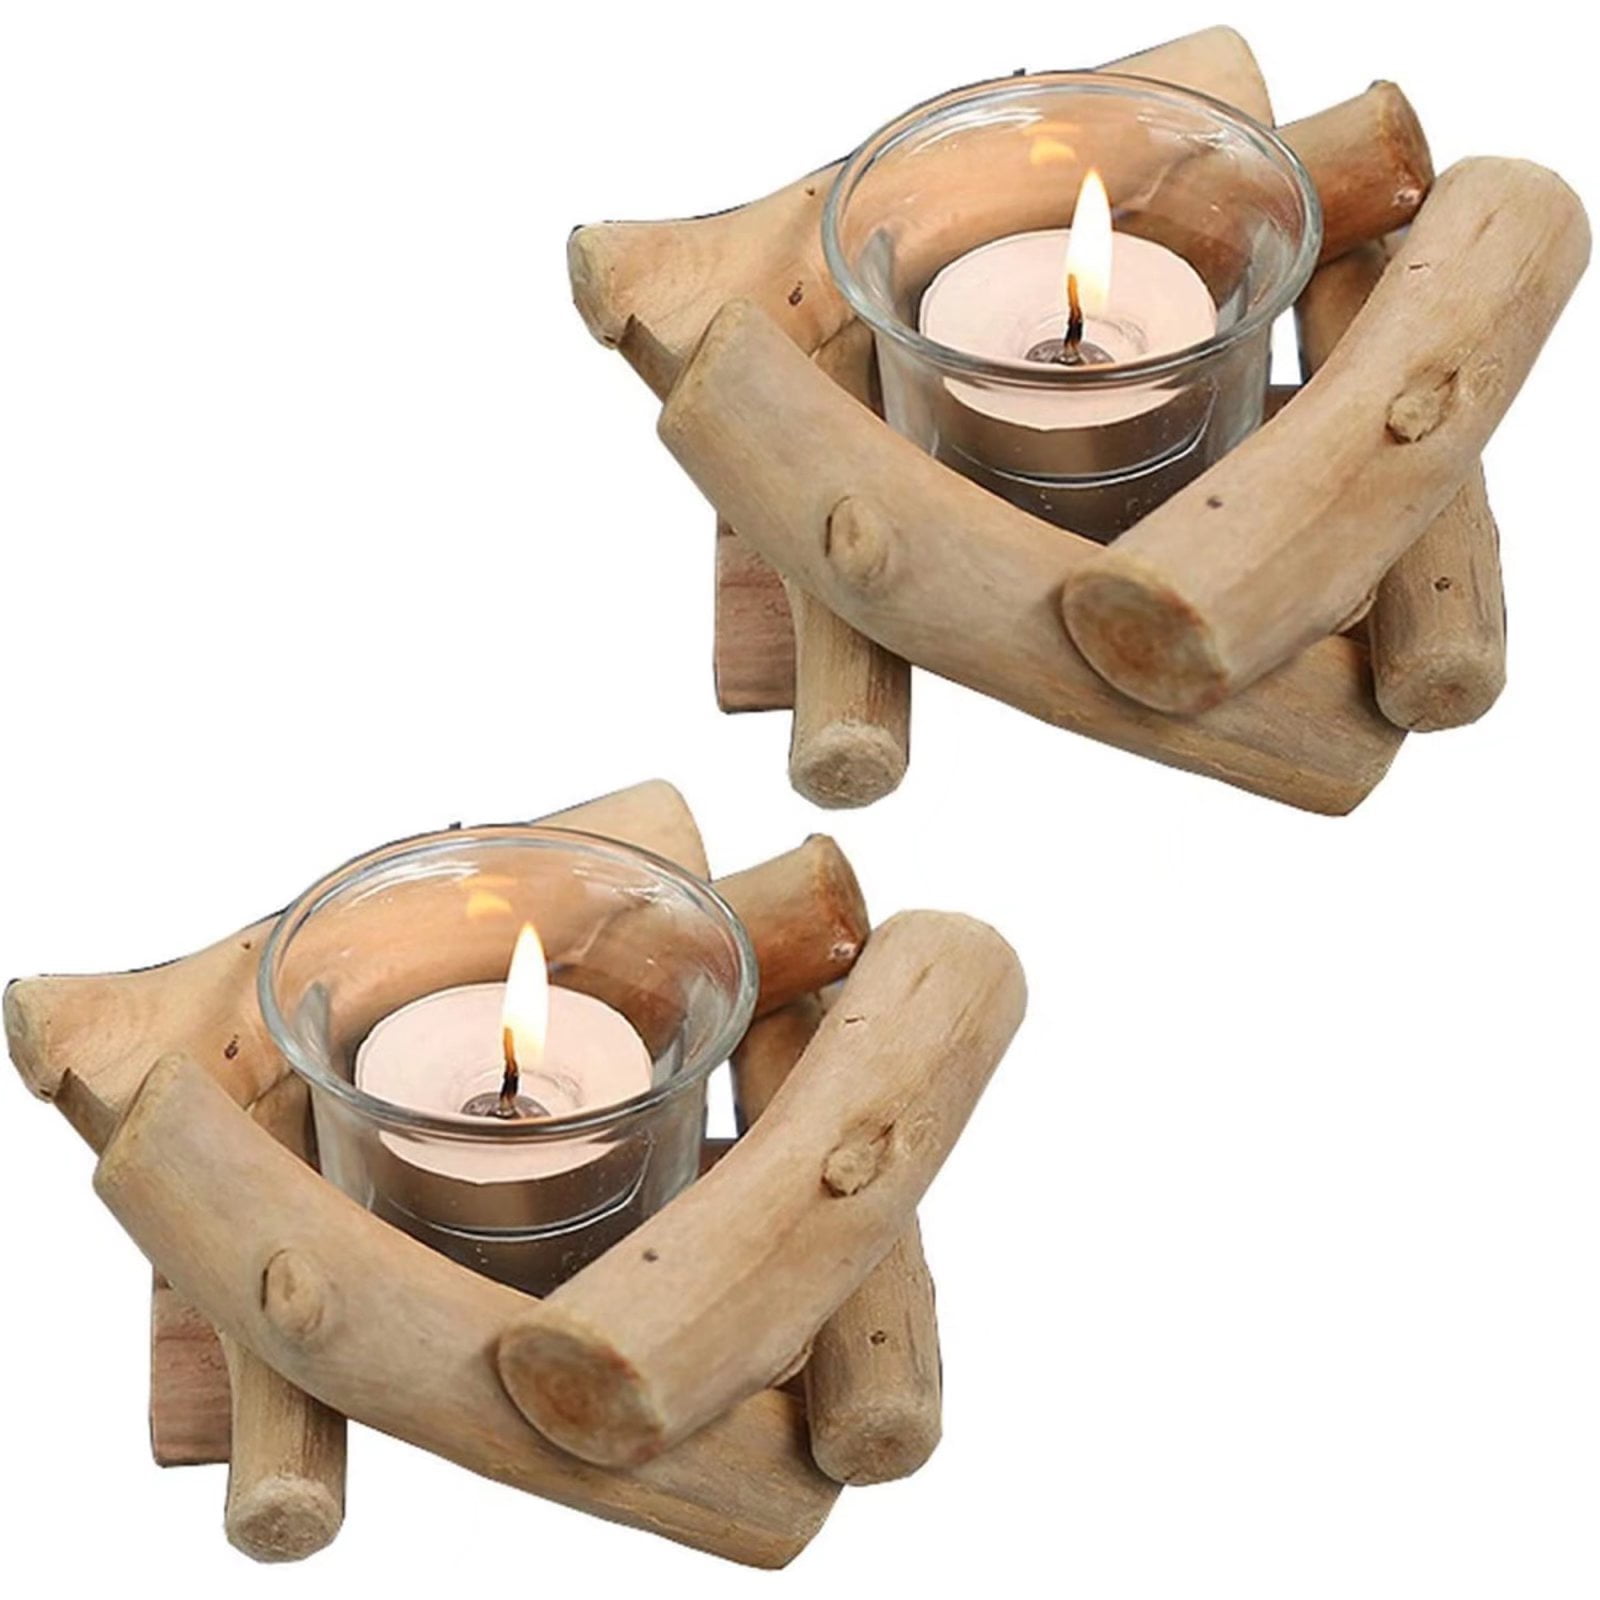 Details about   20pcs Rustic Wooden Candle Holder Novelty Wood Tea Light Candlestick for Parties 